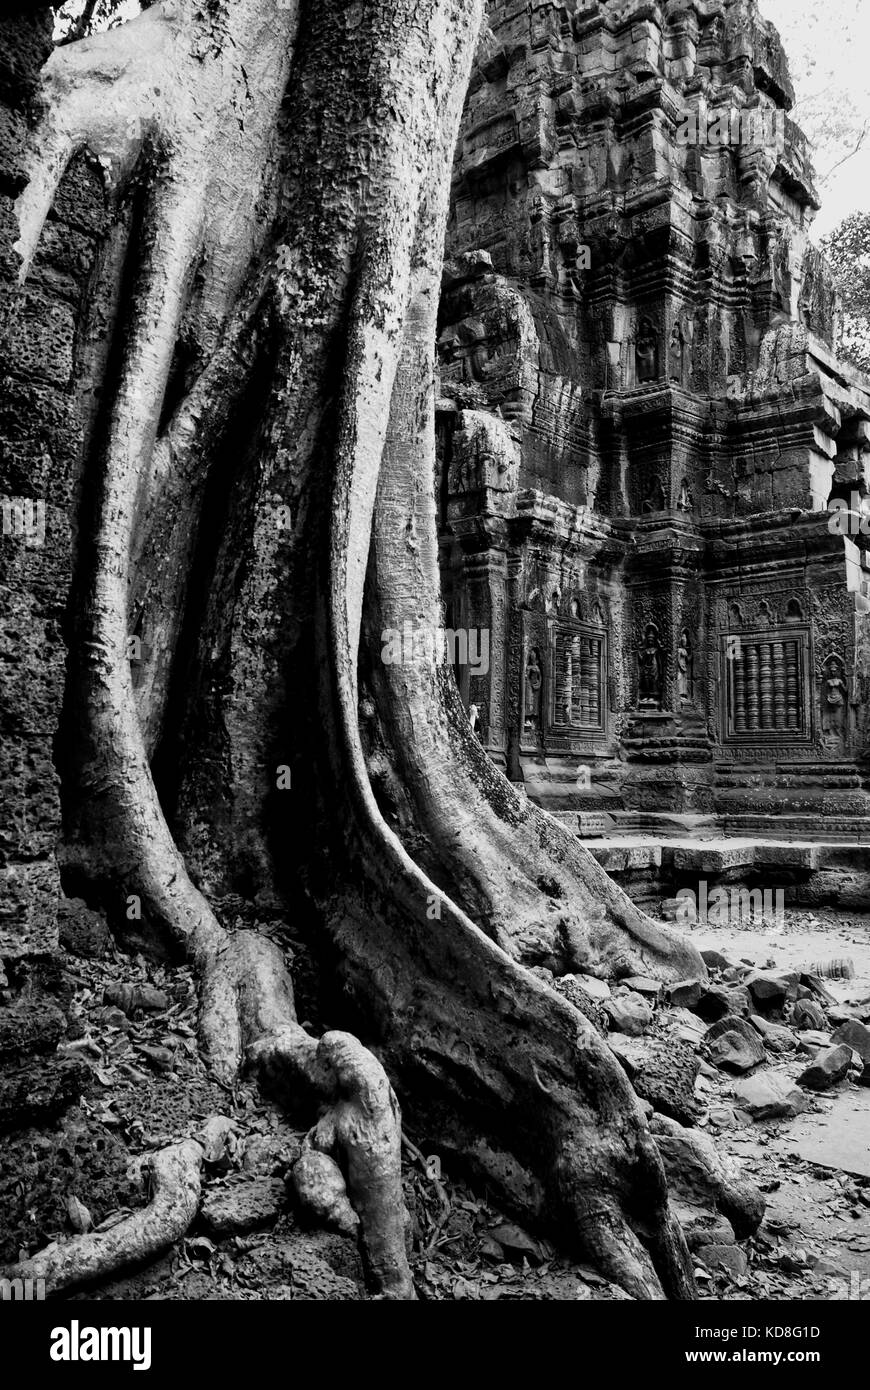 The Temples of Angkor Wat near Siem Reap, Cambodia have been designated a UNESCO World Heritage Site Stock Photo